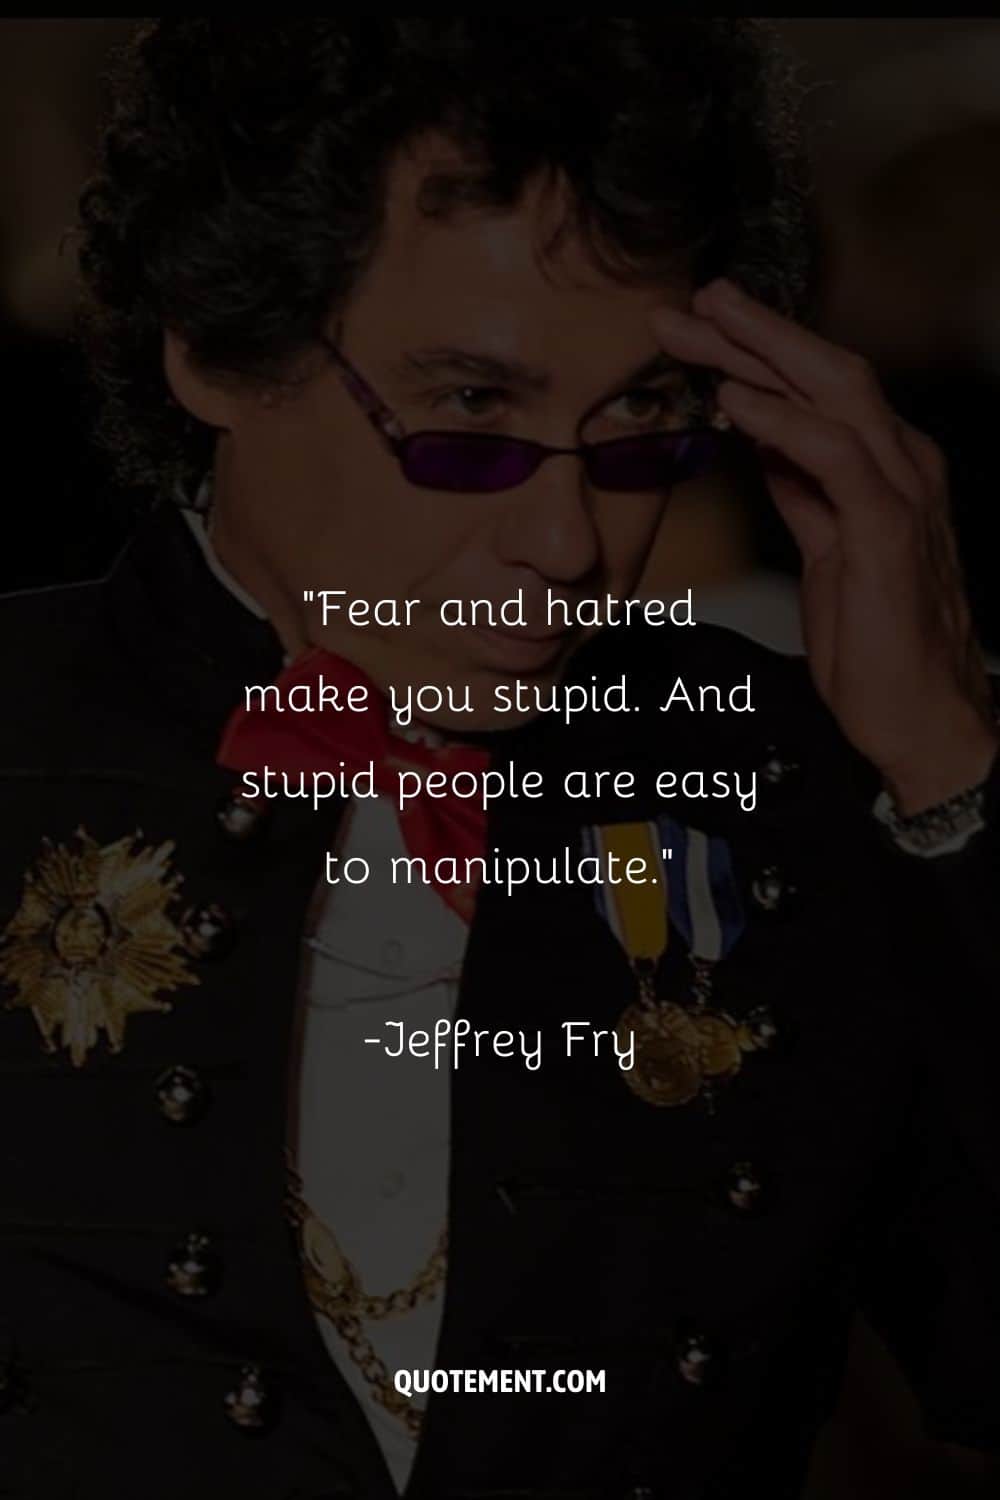 Fear and hatred make you stupid. And stupid people are easy to manipulate.”